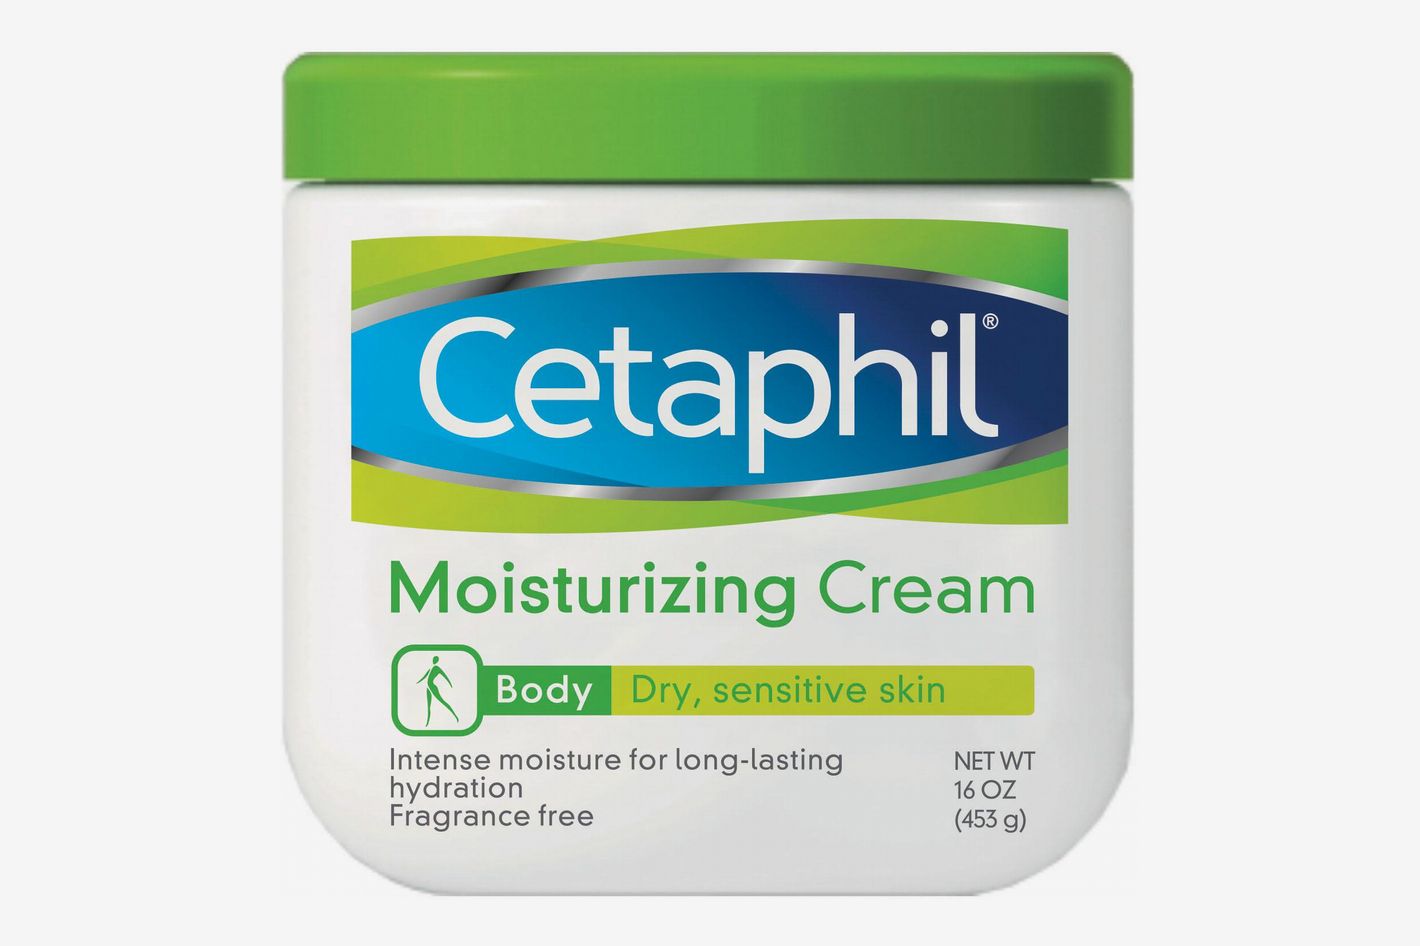 Best Moisturizer For Dry Skin By Dermatologist Beauty And Health